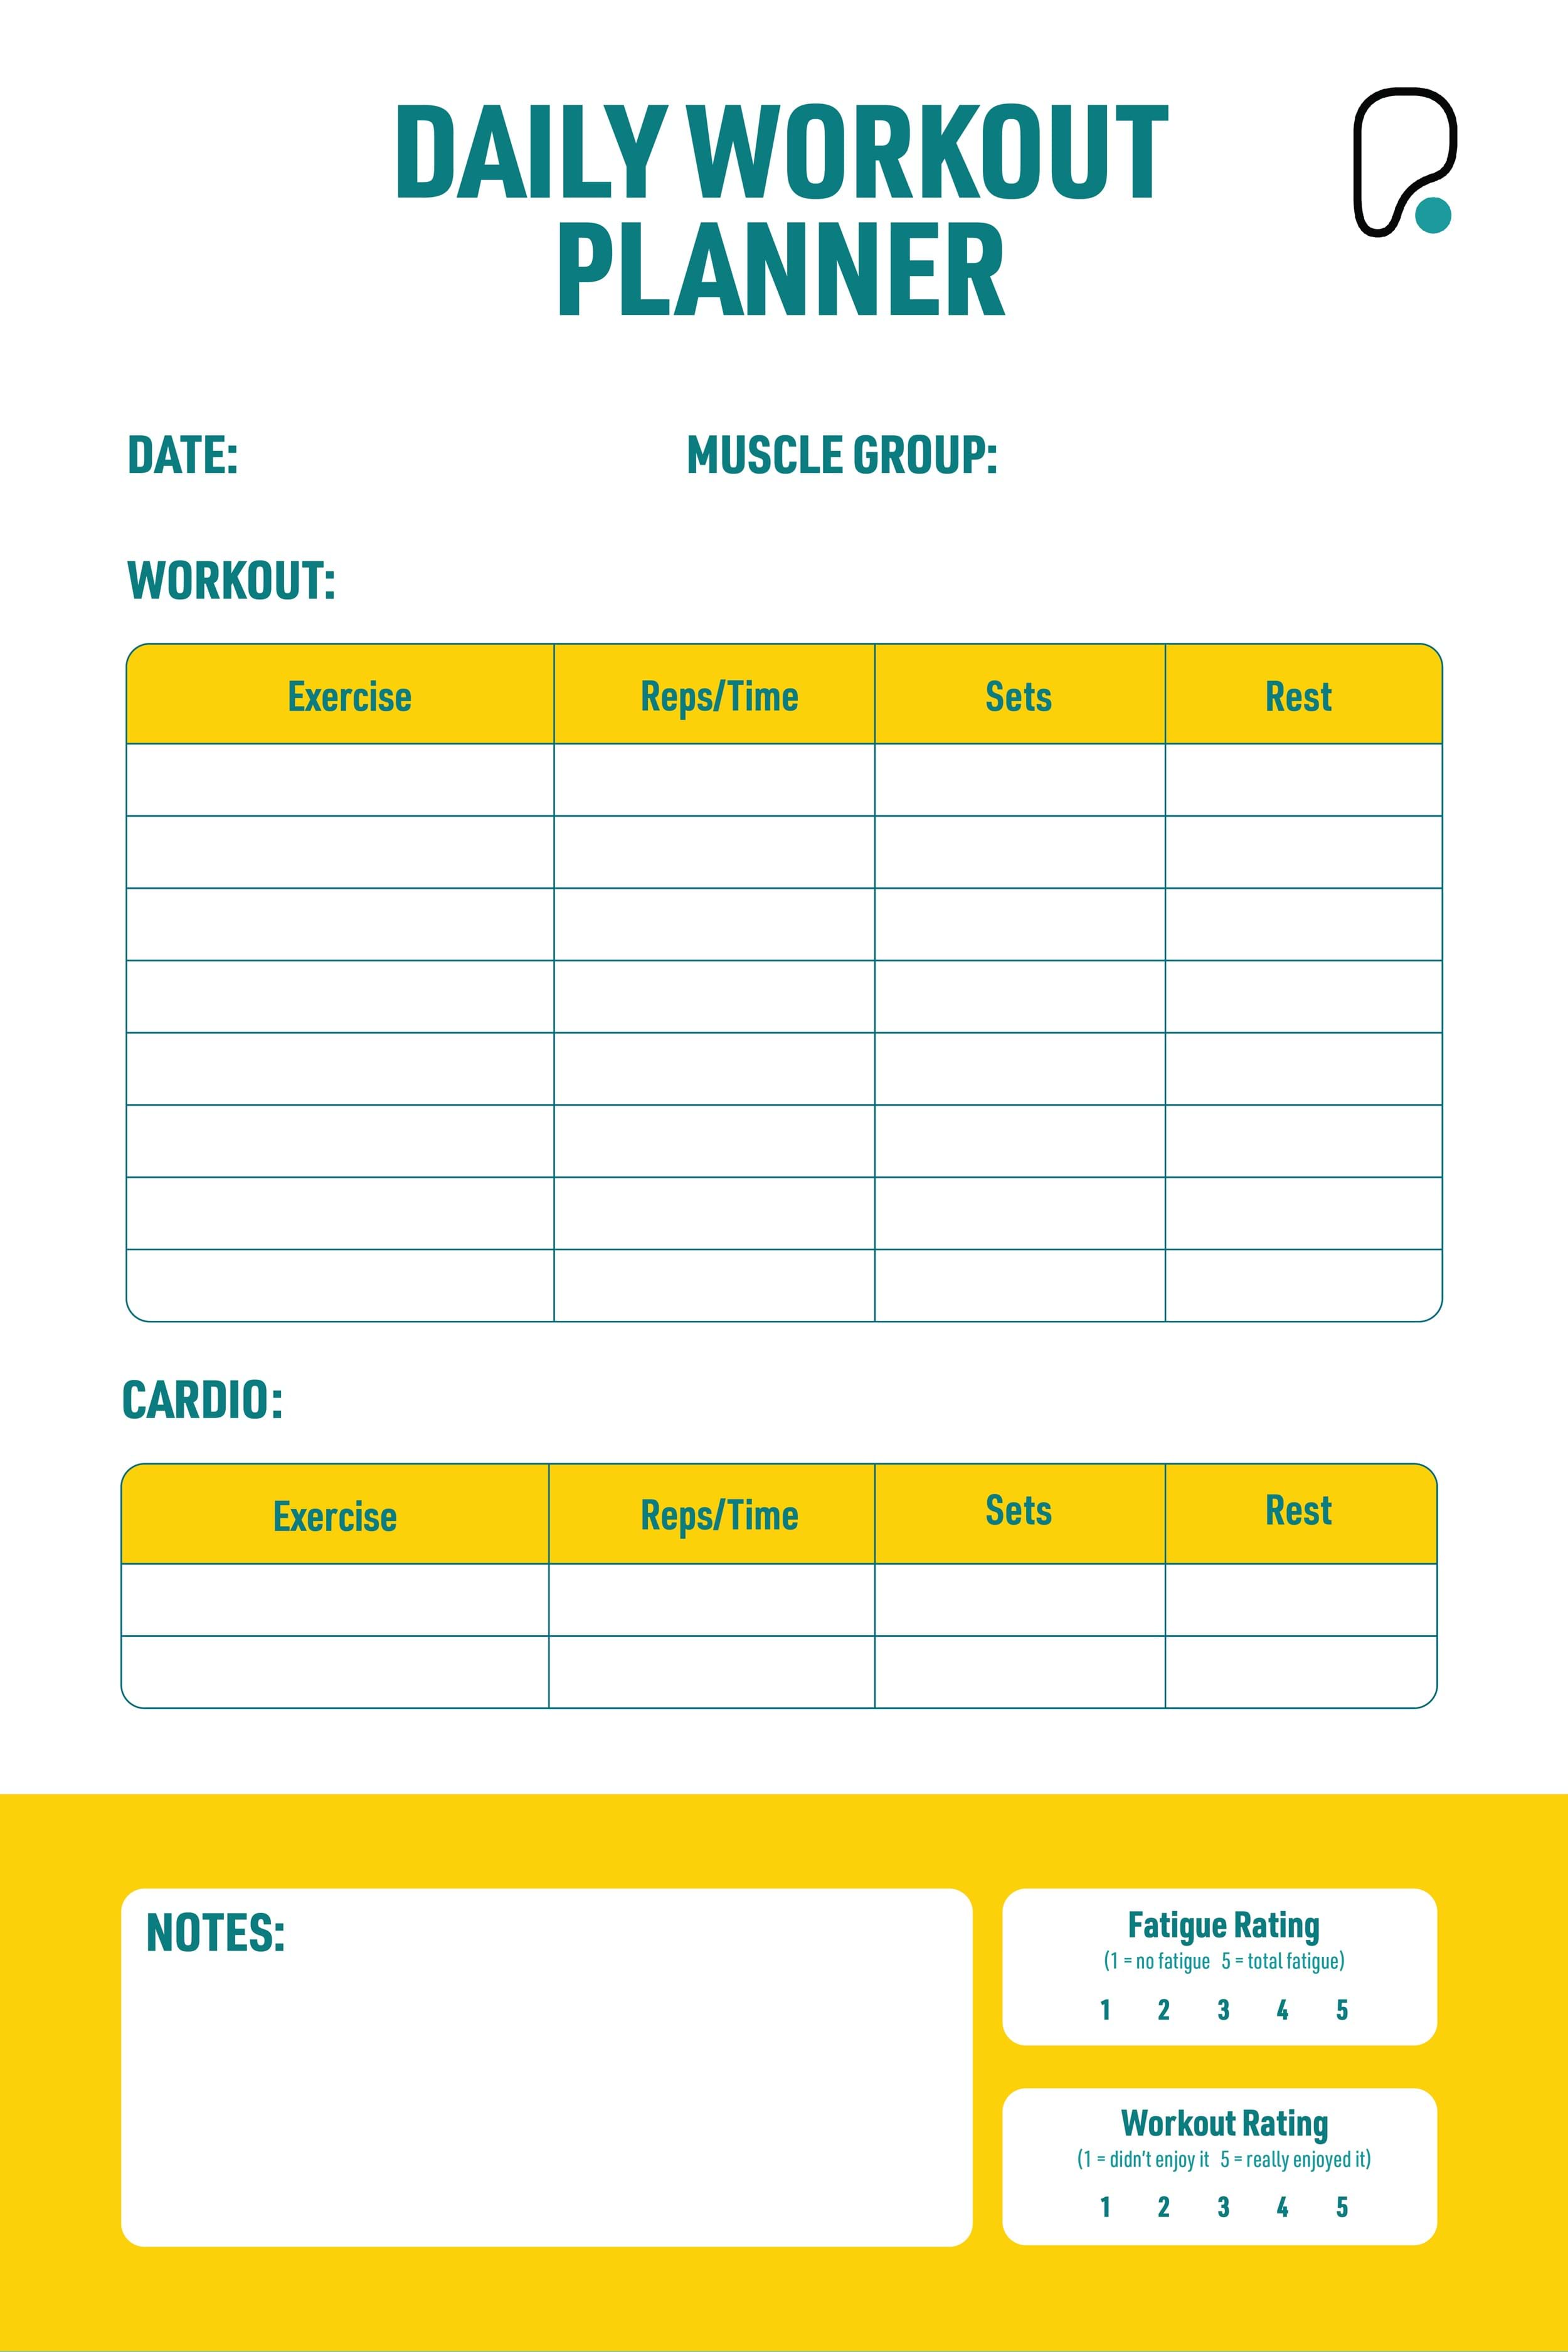 Workout Plan Templates: Download Or Make Yourself PureGym 31